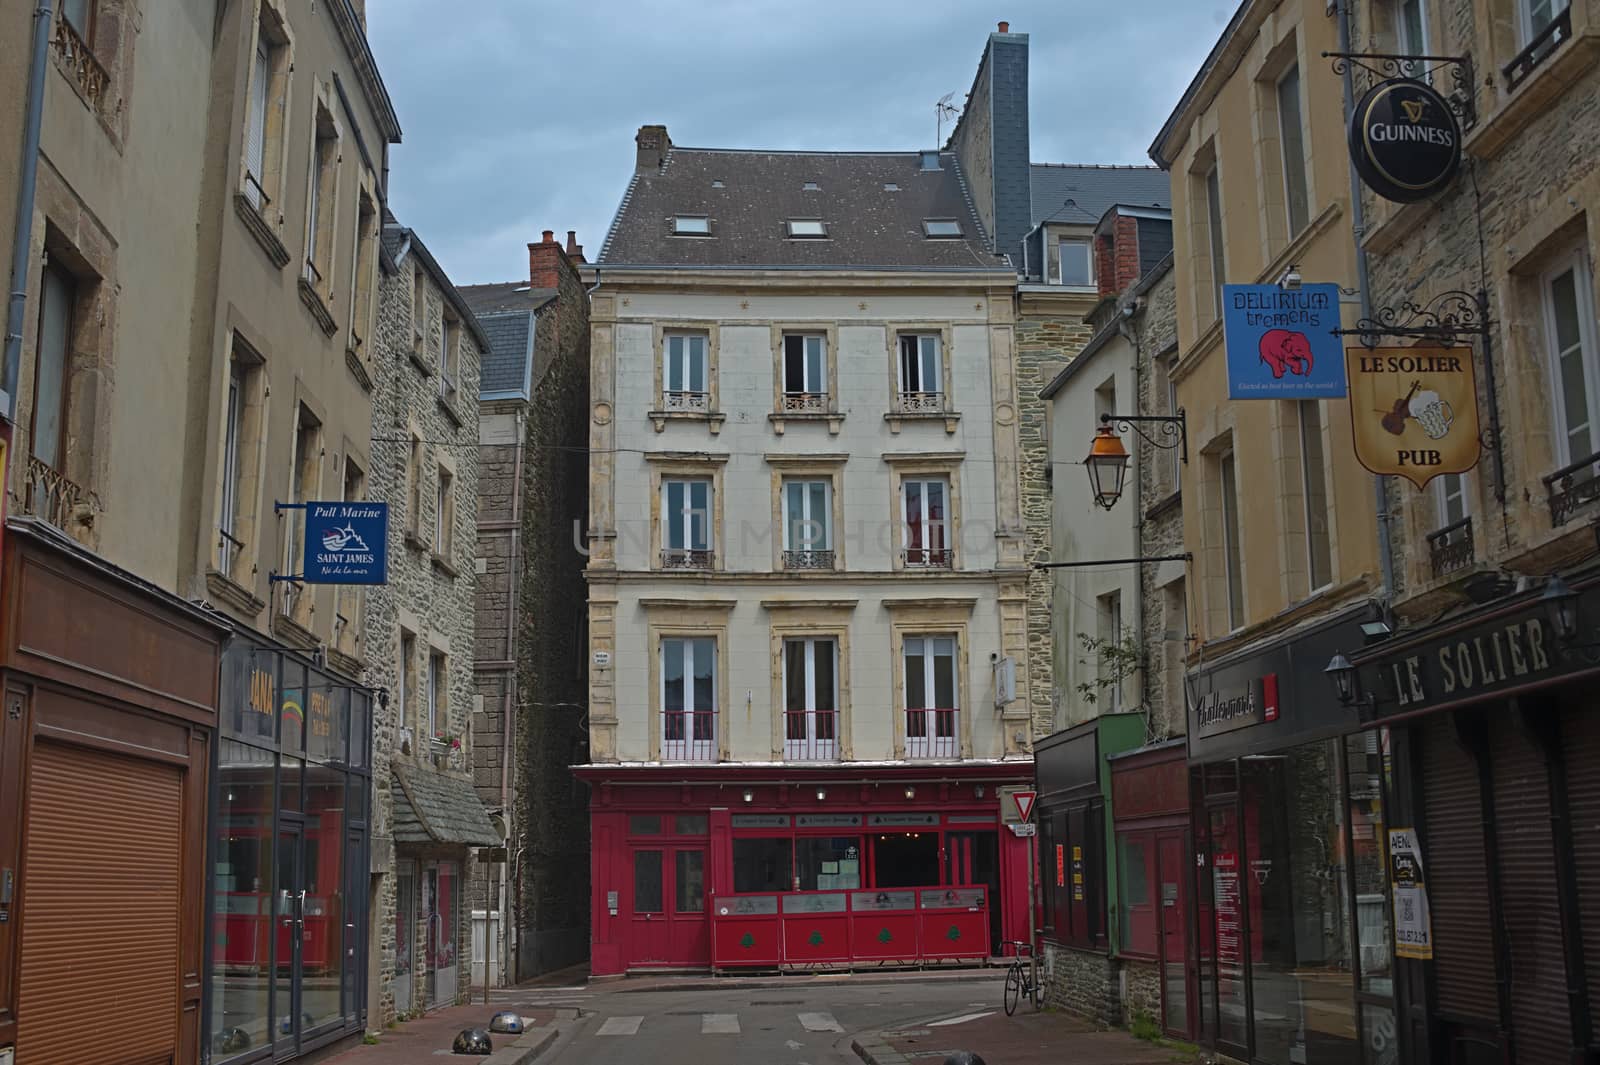 CHERBOURG, FRANCE - June 6th 2019 - Empty street with stone building in traditional town by sheriffkule